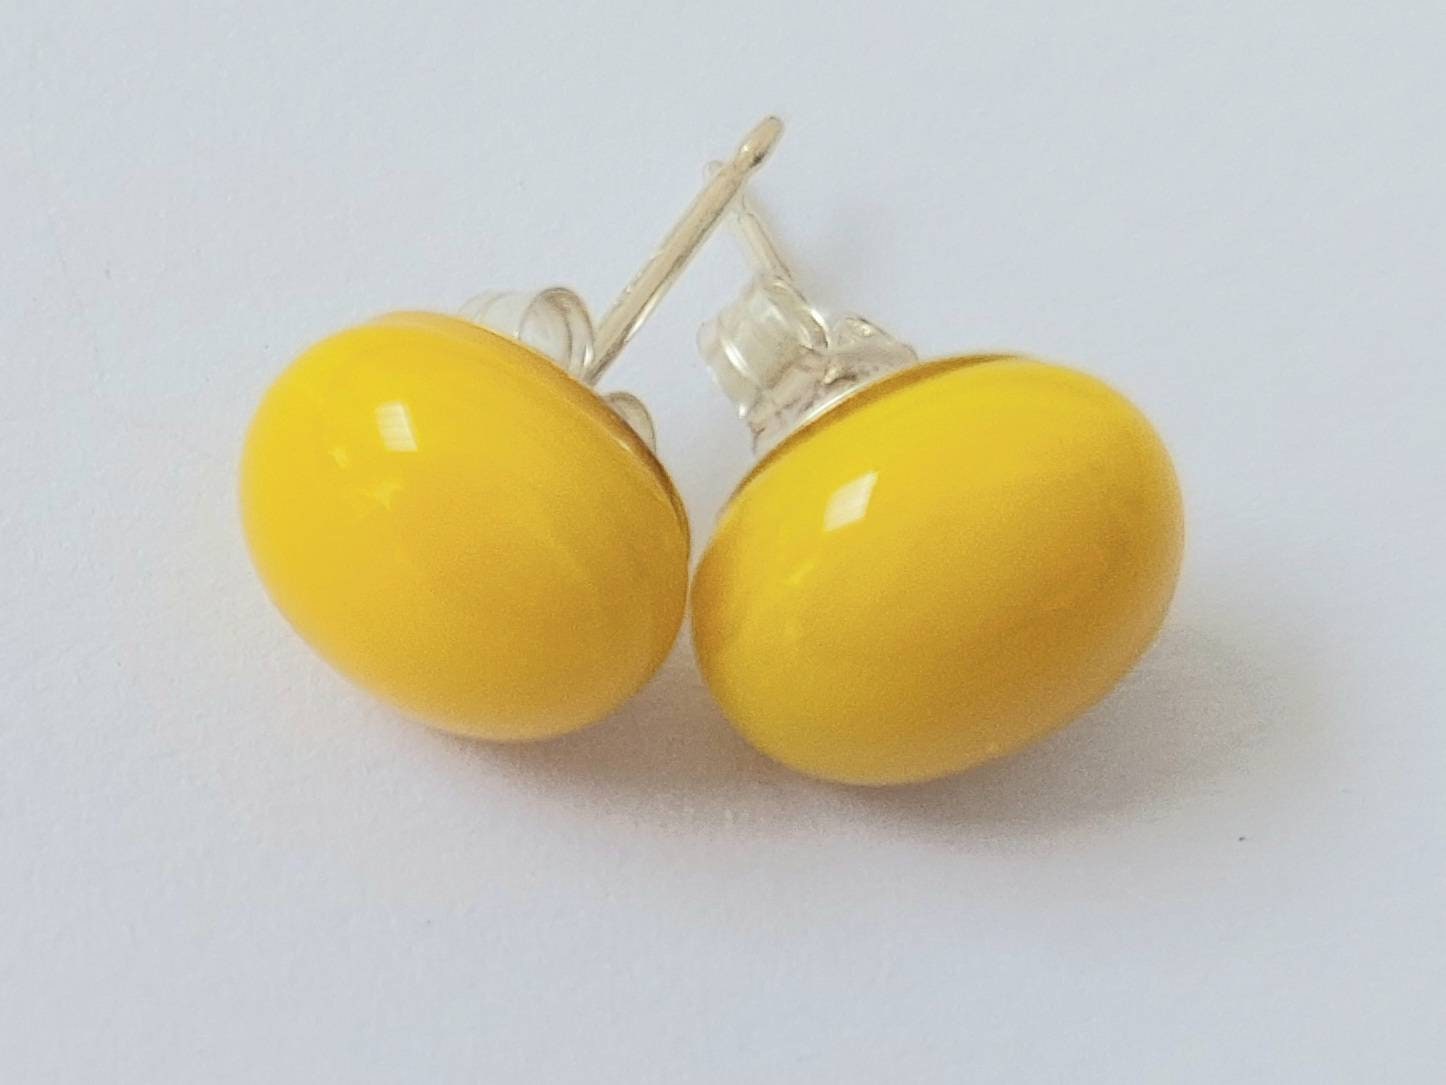 Sunshine Yellow Glass Stud Earrings With Sterling Silver Posts & Butterfly Closures, Small Fused Studs, Vibrant